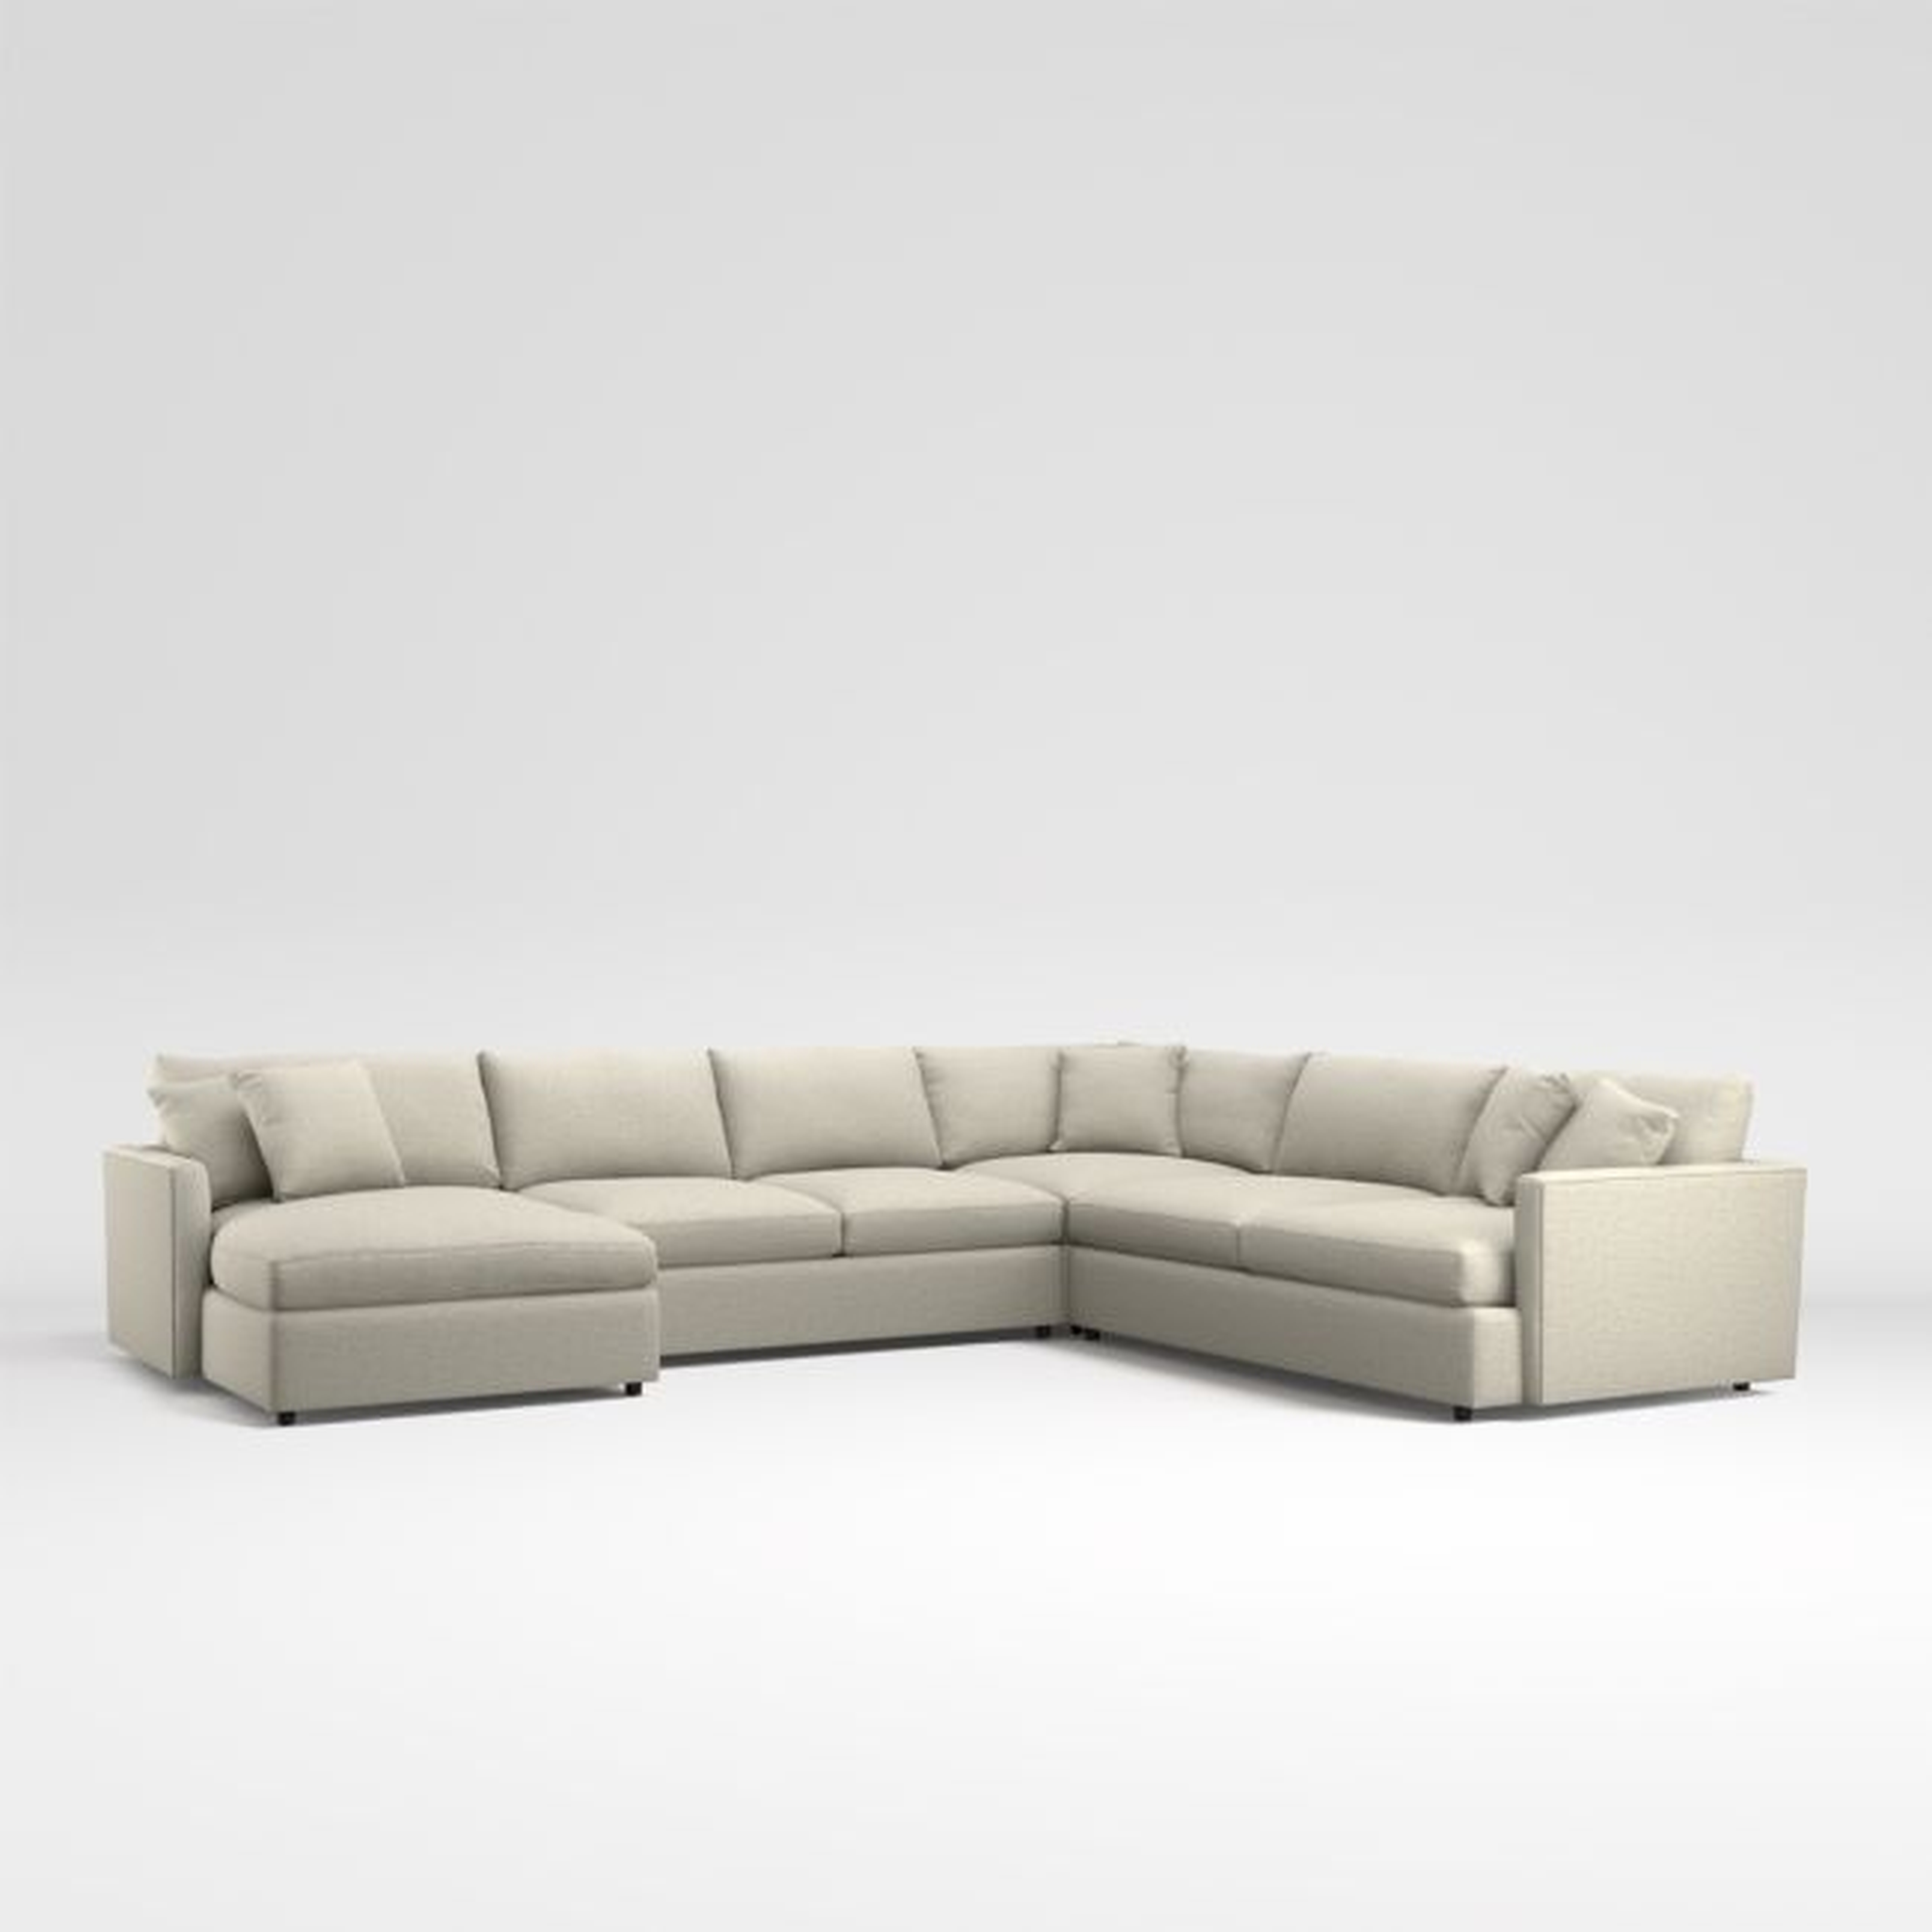 Lounge 4-Piece Sectional - Crate and Barrel